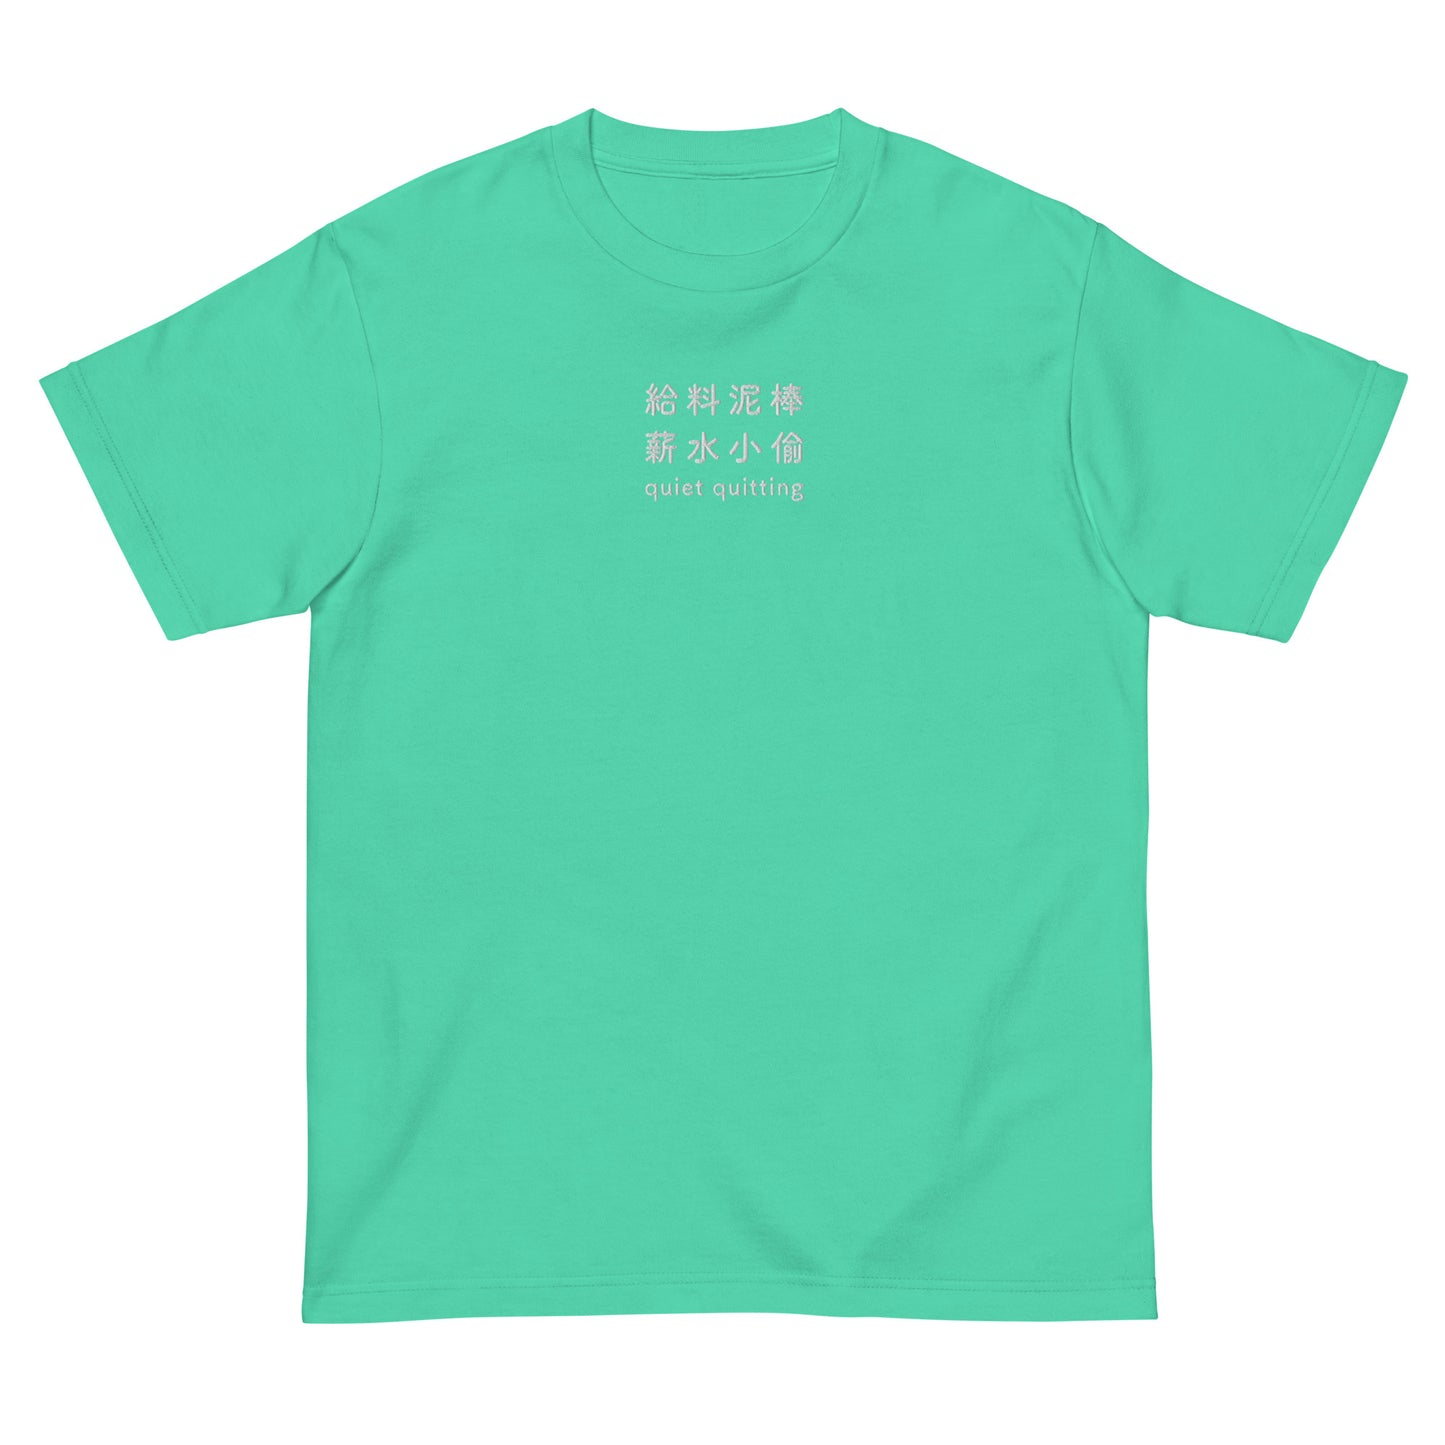 Light Green High Quality Tee - Front Design with an White Embroidery "Quiet Quitting" in Japanese,Chinese and English